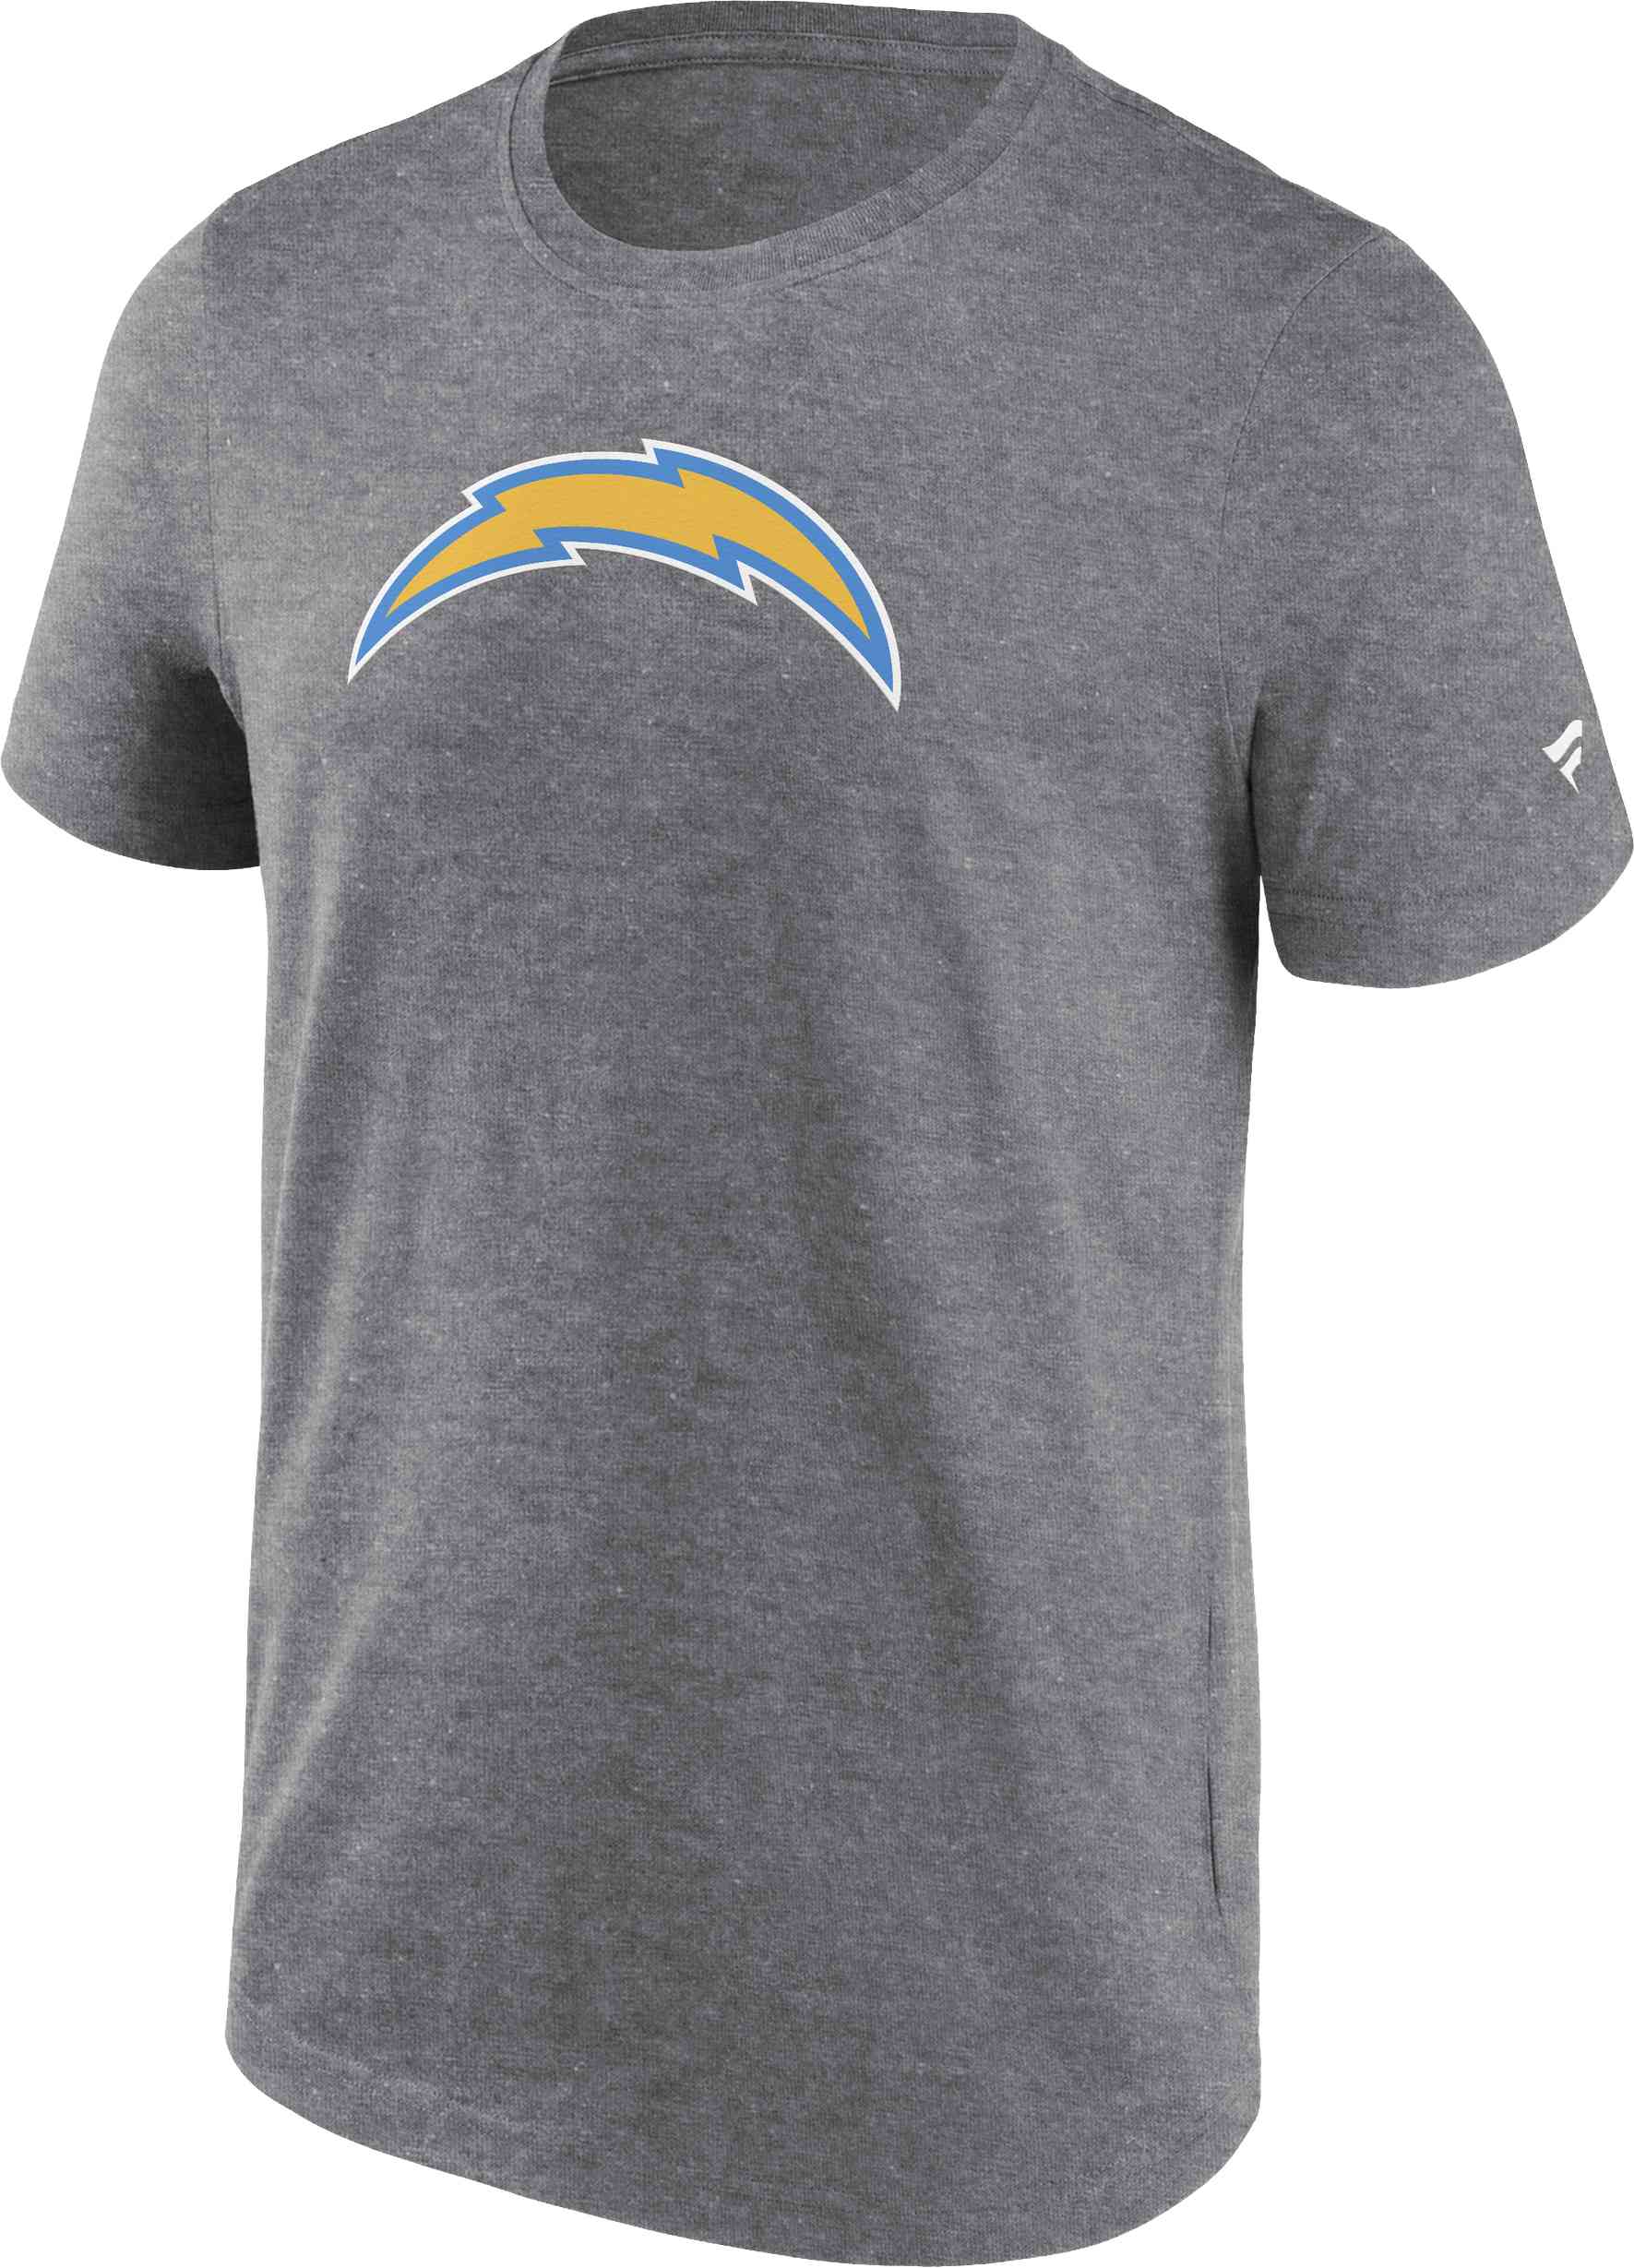 Fanatics - NFL Los Angeles Chargers Primary Logo Graphic T-Shirt